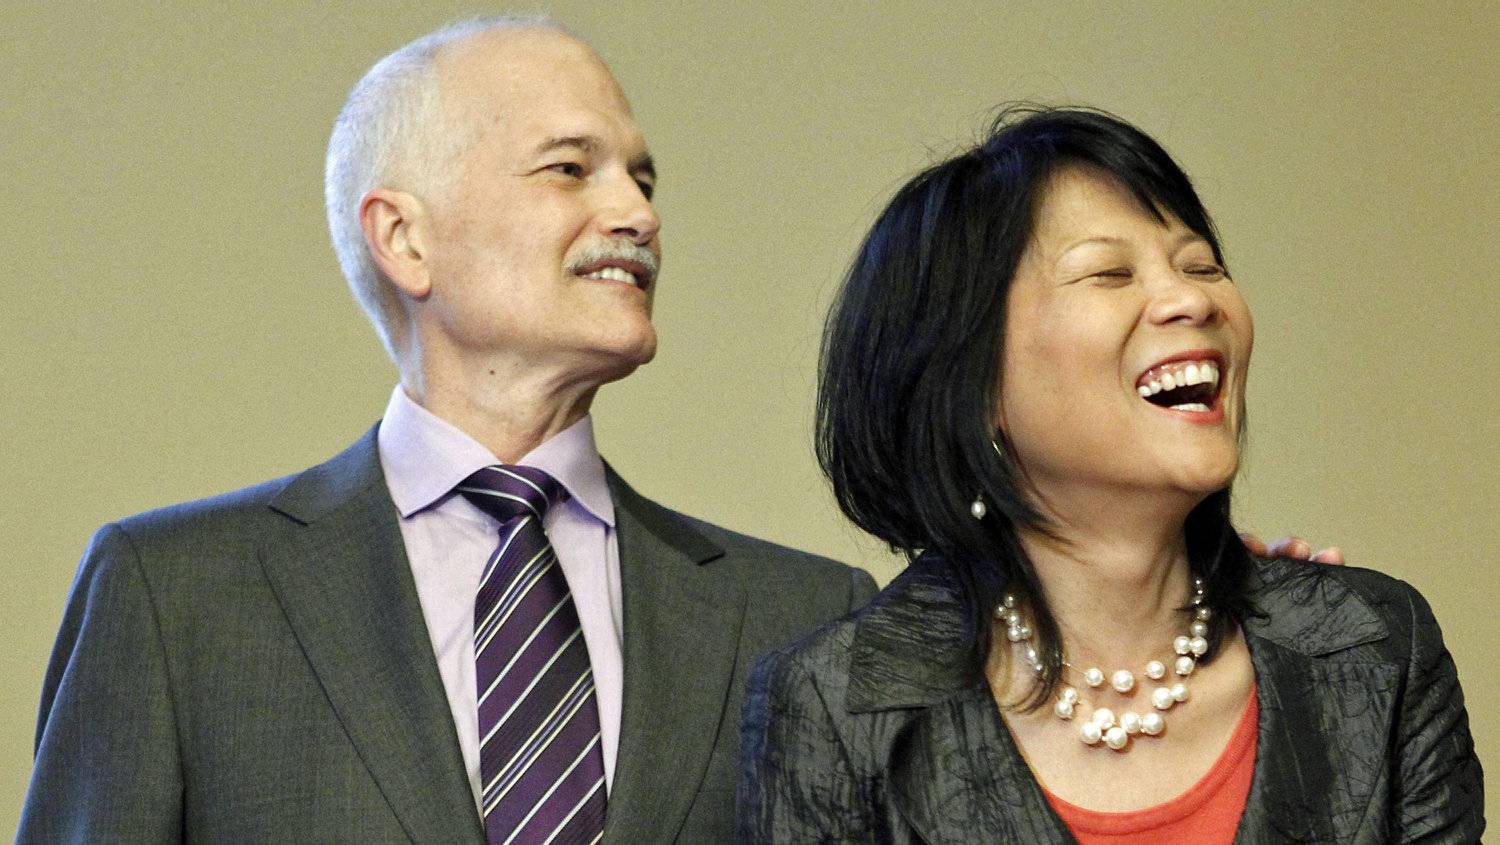 Jack Layton Quote: “Cherish every moment with those you love at every stage  of your journey.”